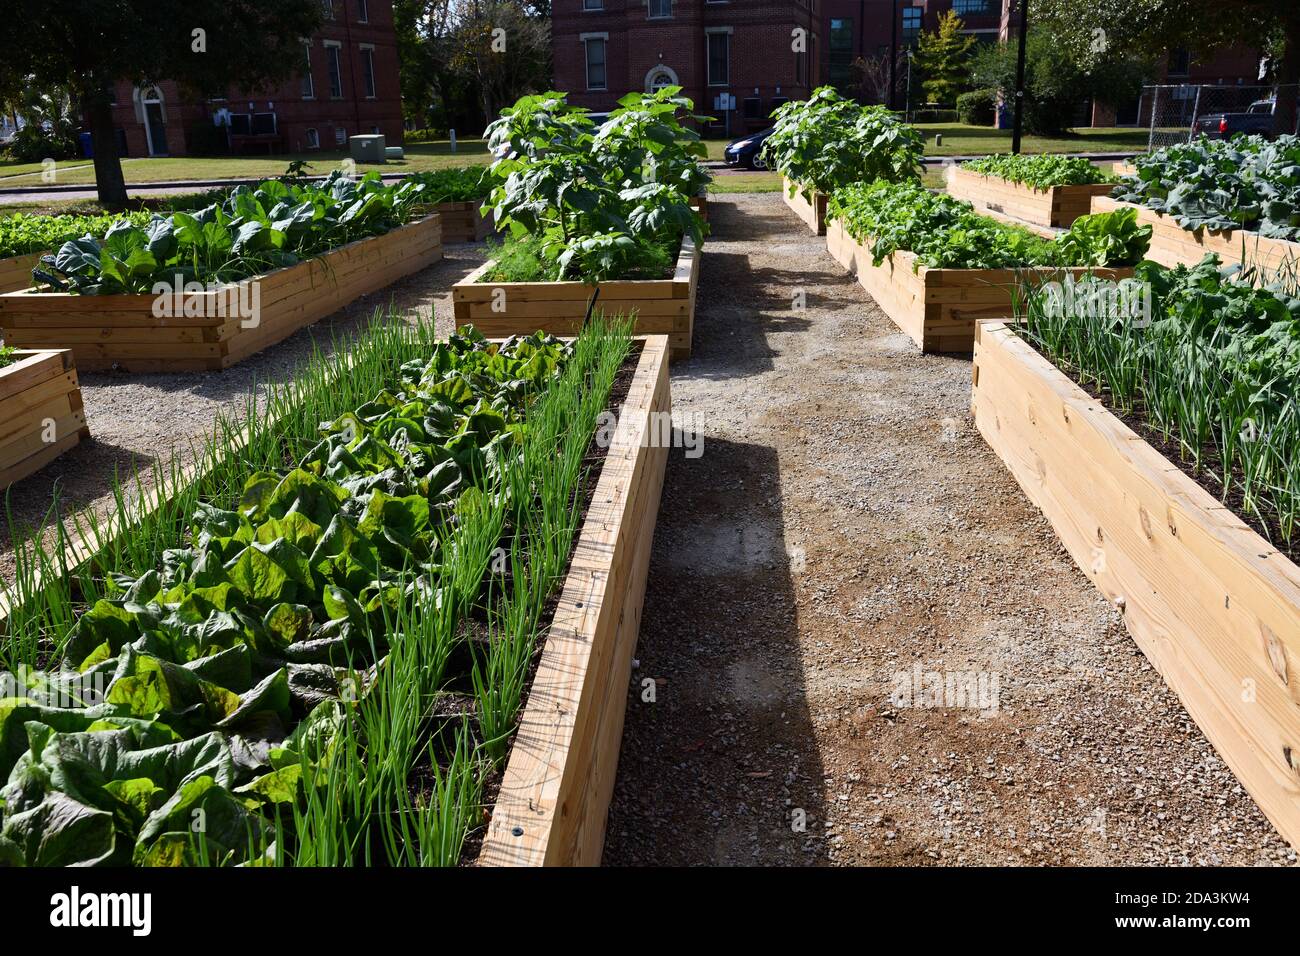 Urban Gardens; Their Settings of an 1850 English Village in USA for Elderly, Kale, Plants, Growing Greens, Trolley, Fire Station,Picnic in Garden. Stock Photo